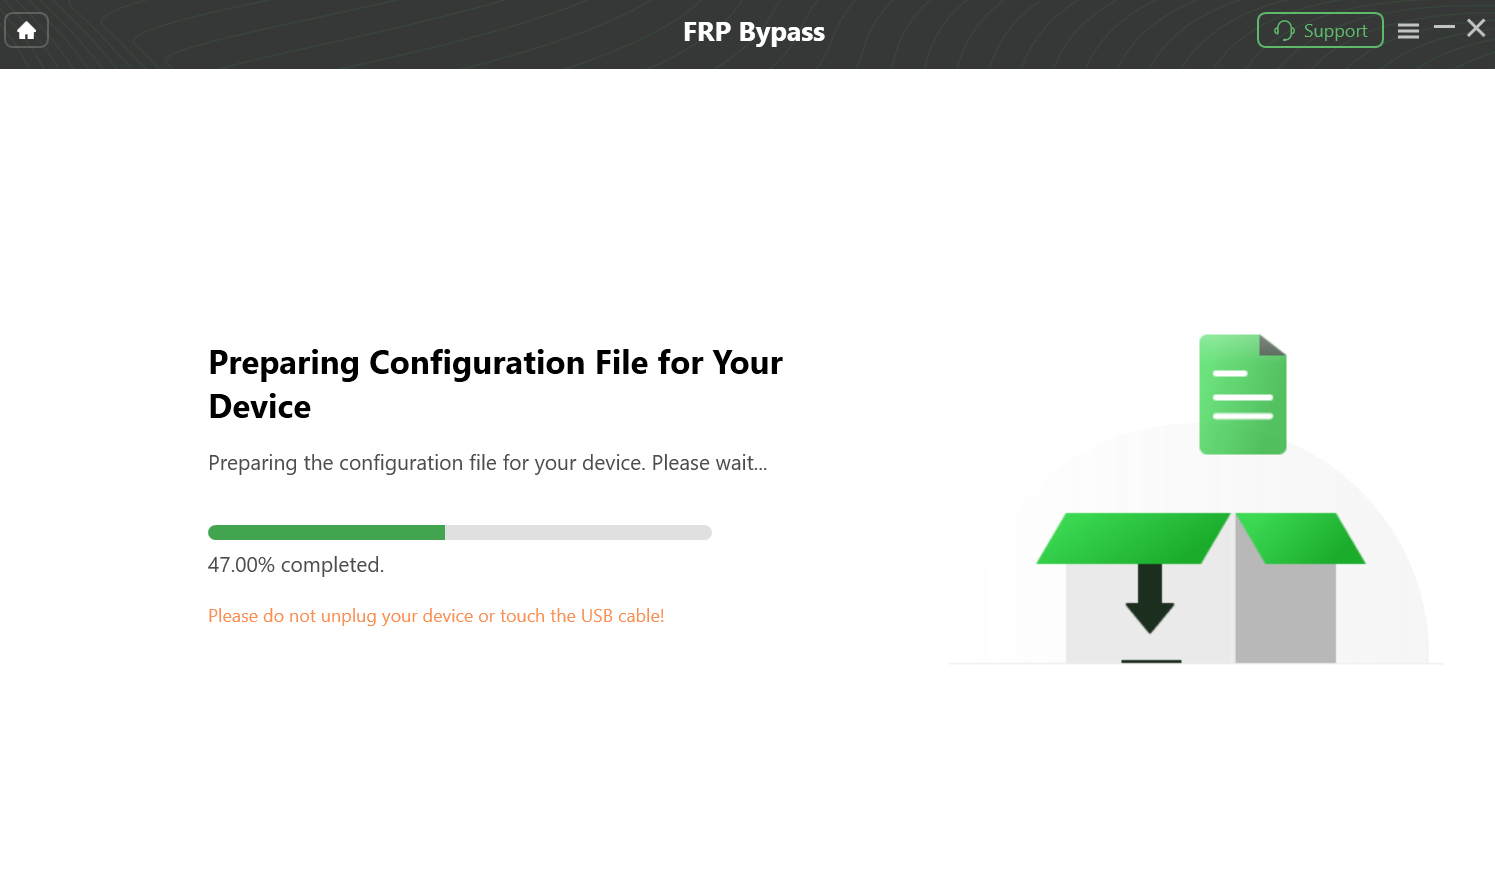 Configuration File Is Prepared for Bypassing FRP Lock